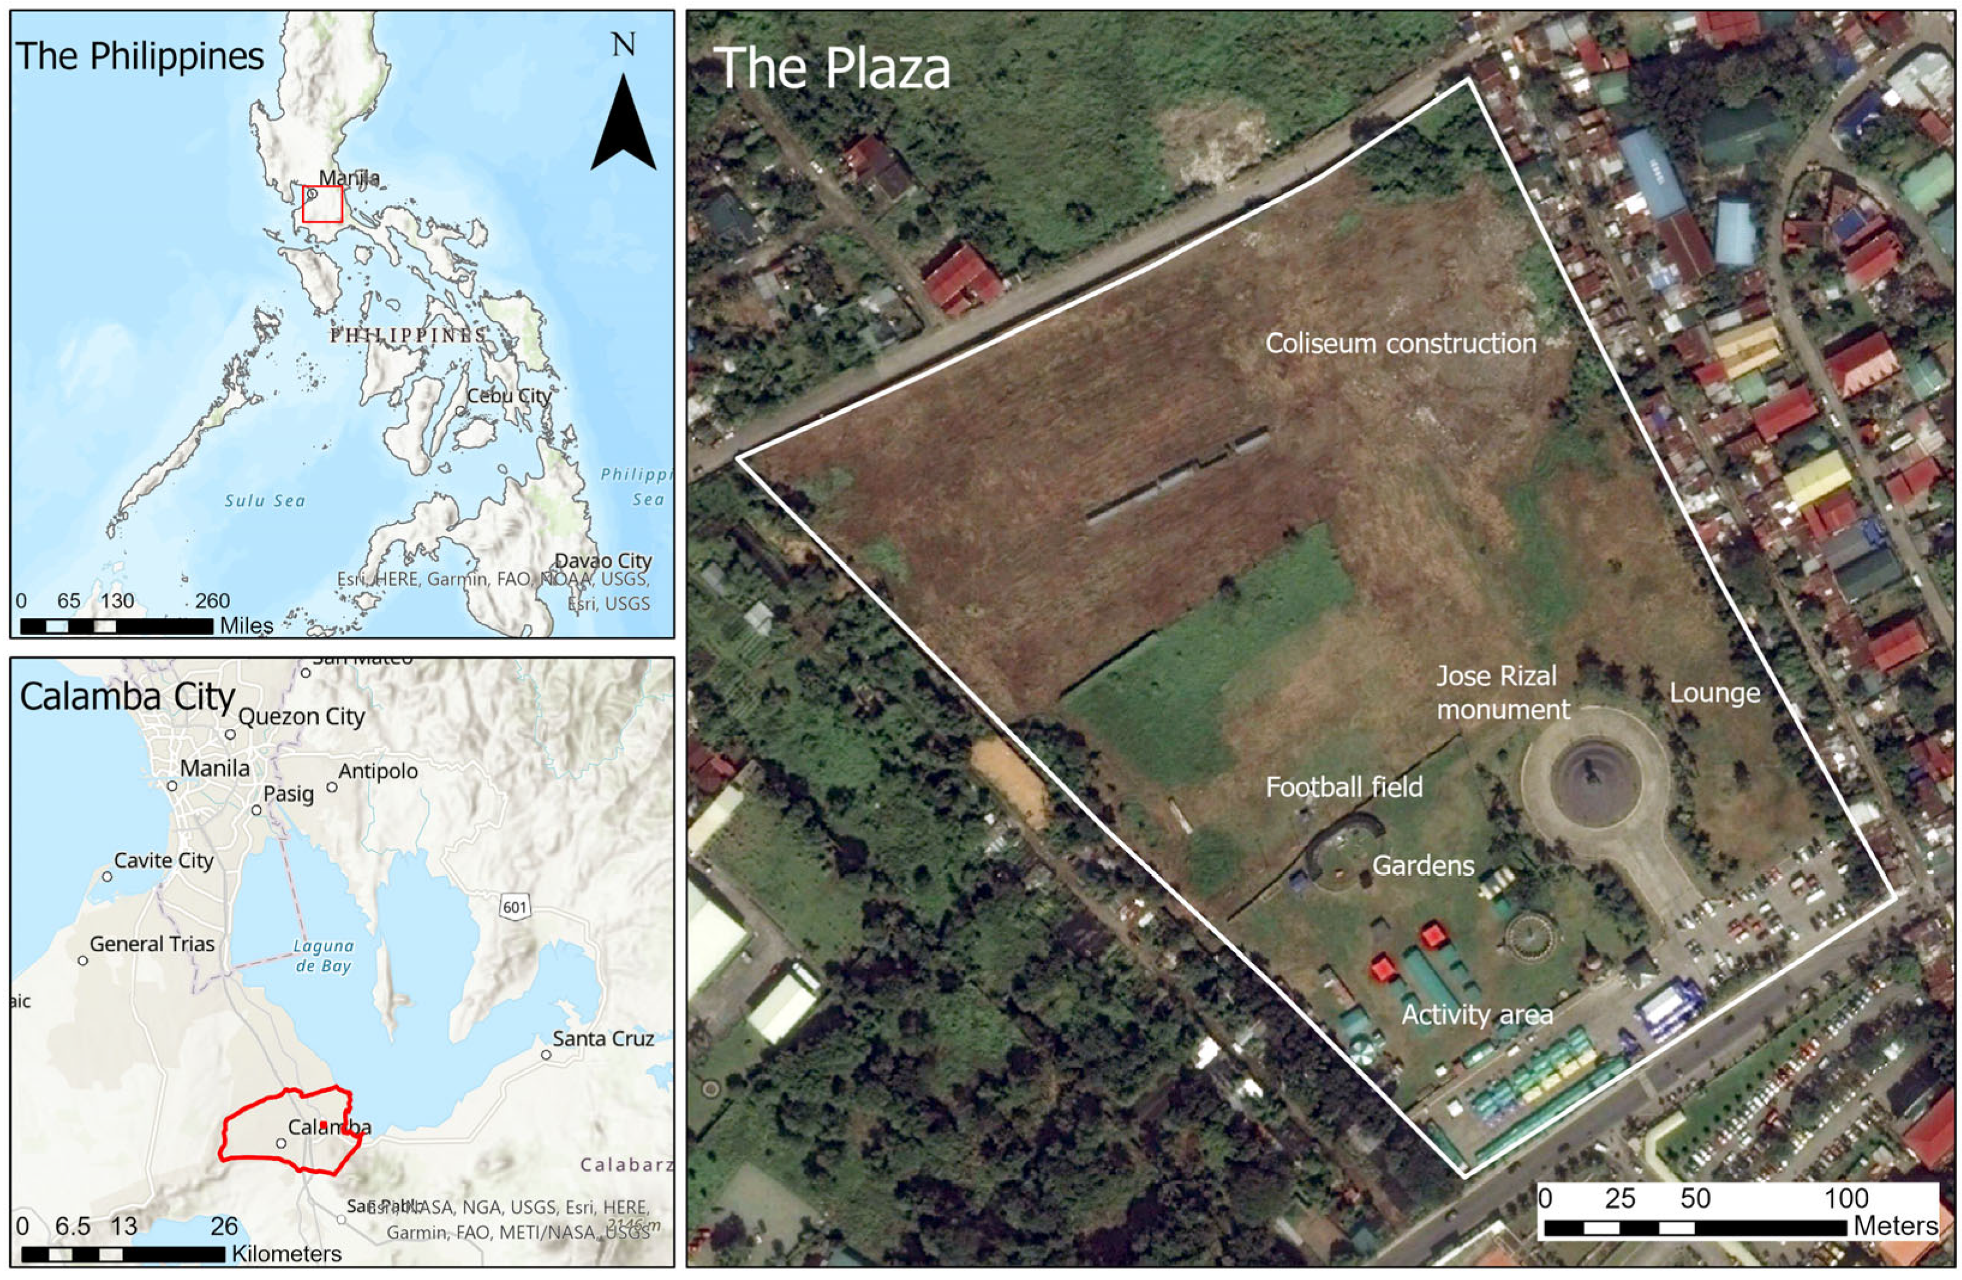 Sustainability Free Full-Text Socio-Cultural Valuation of Urban Parks The Case of Jose Rizal Plaza in Calamba City, The Philippines